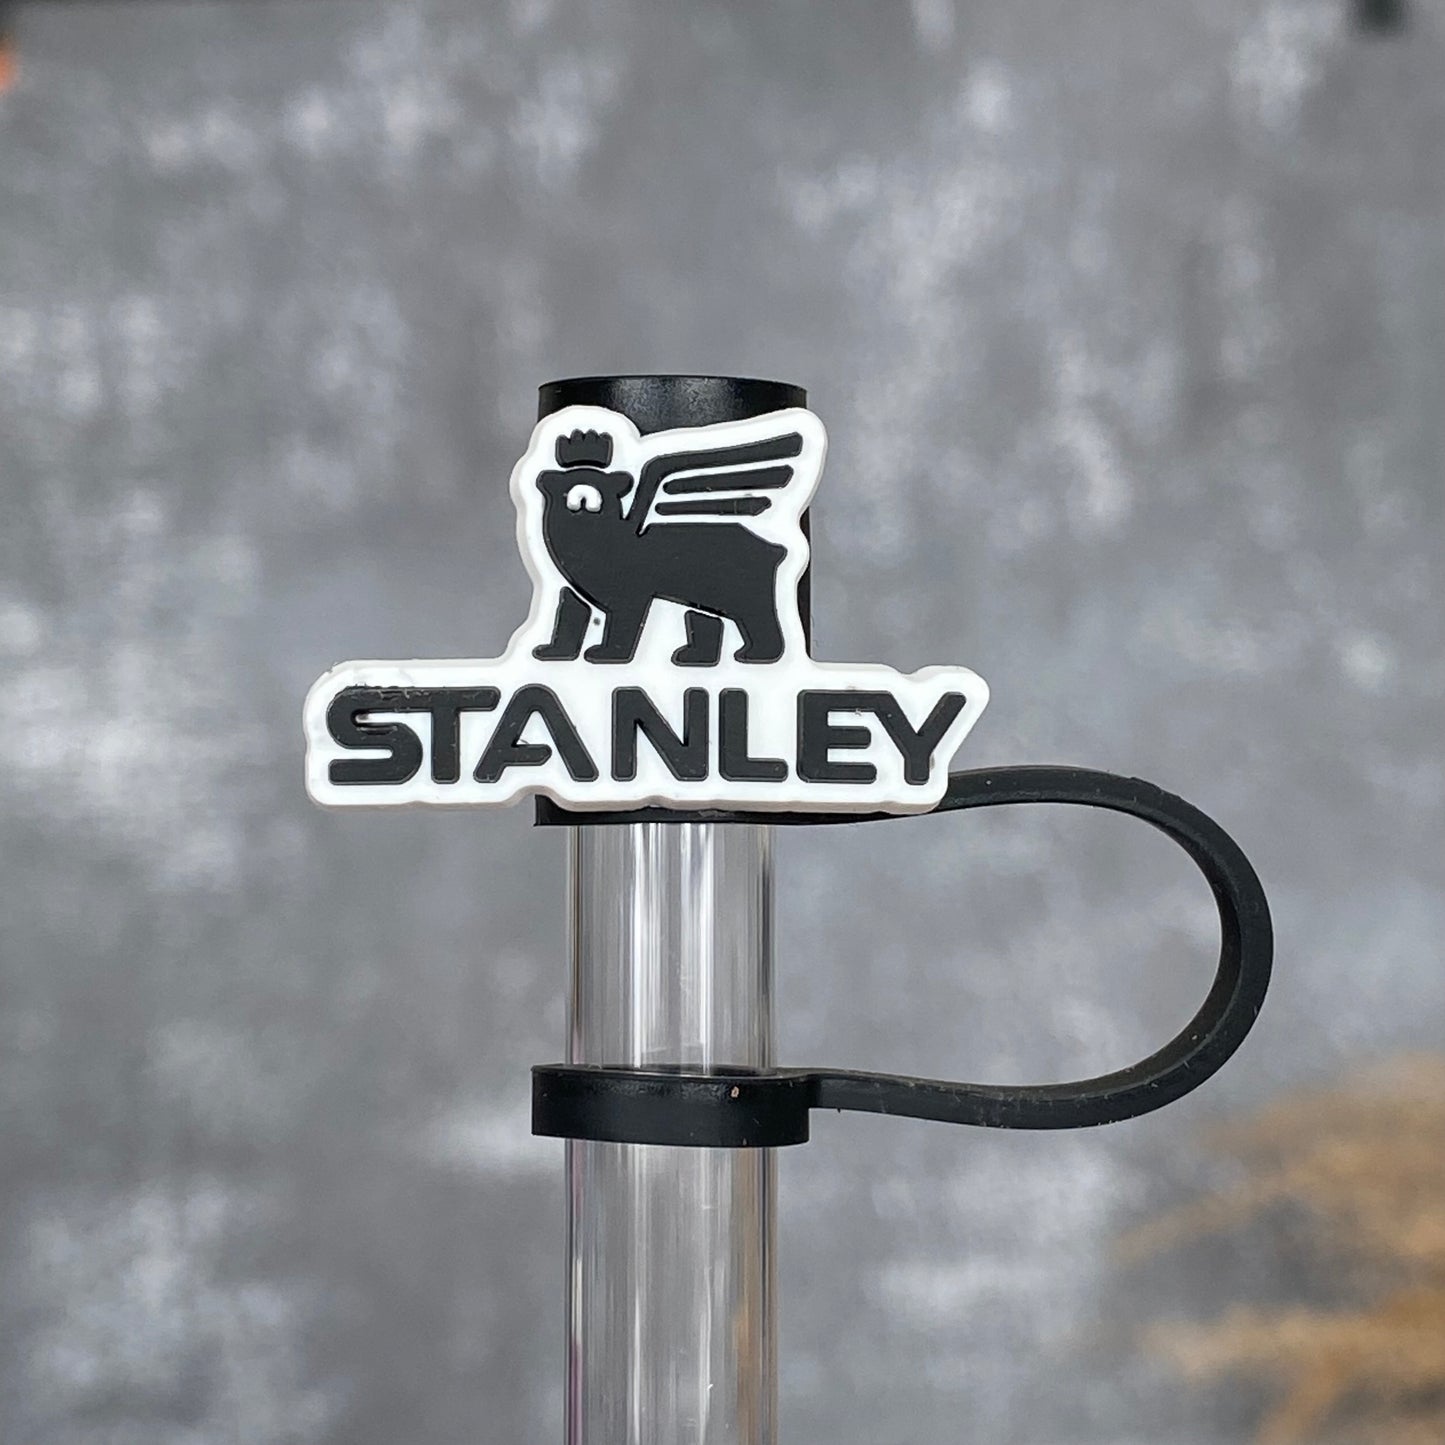 Stanley Quencher Straw Toppers 